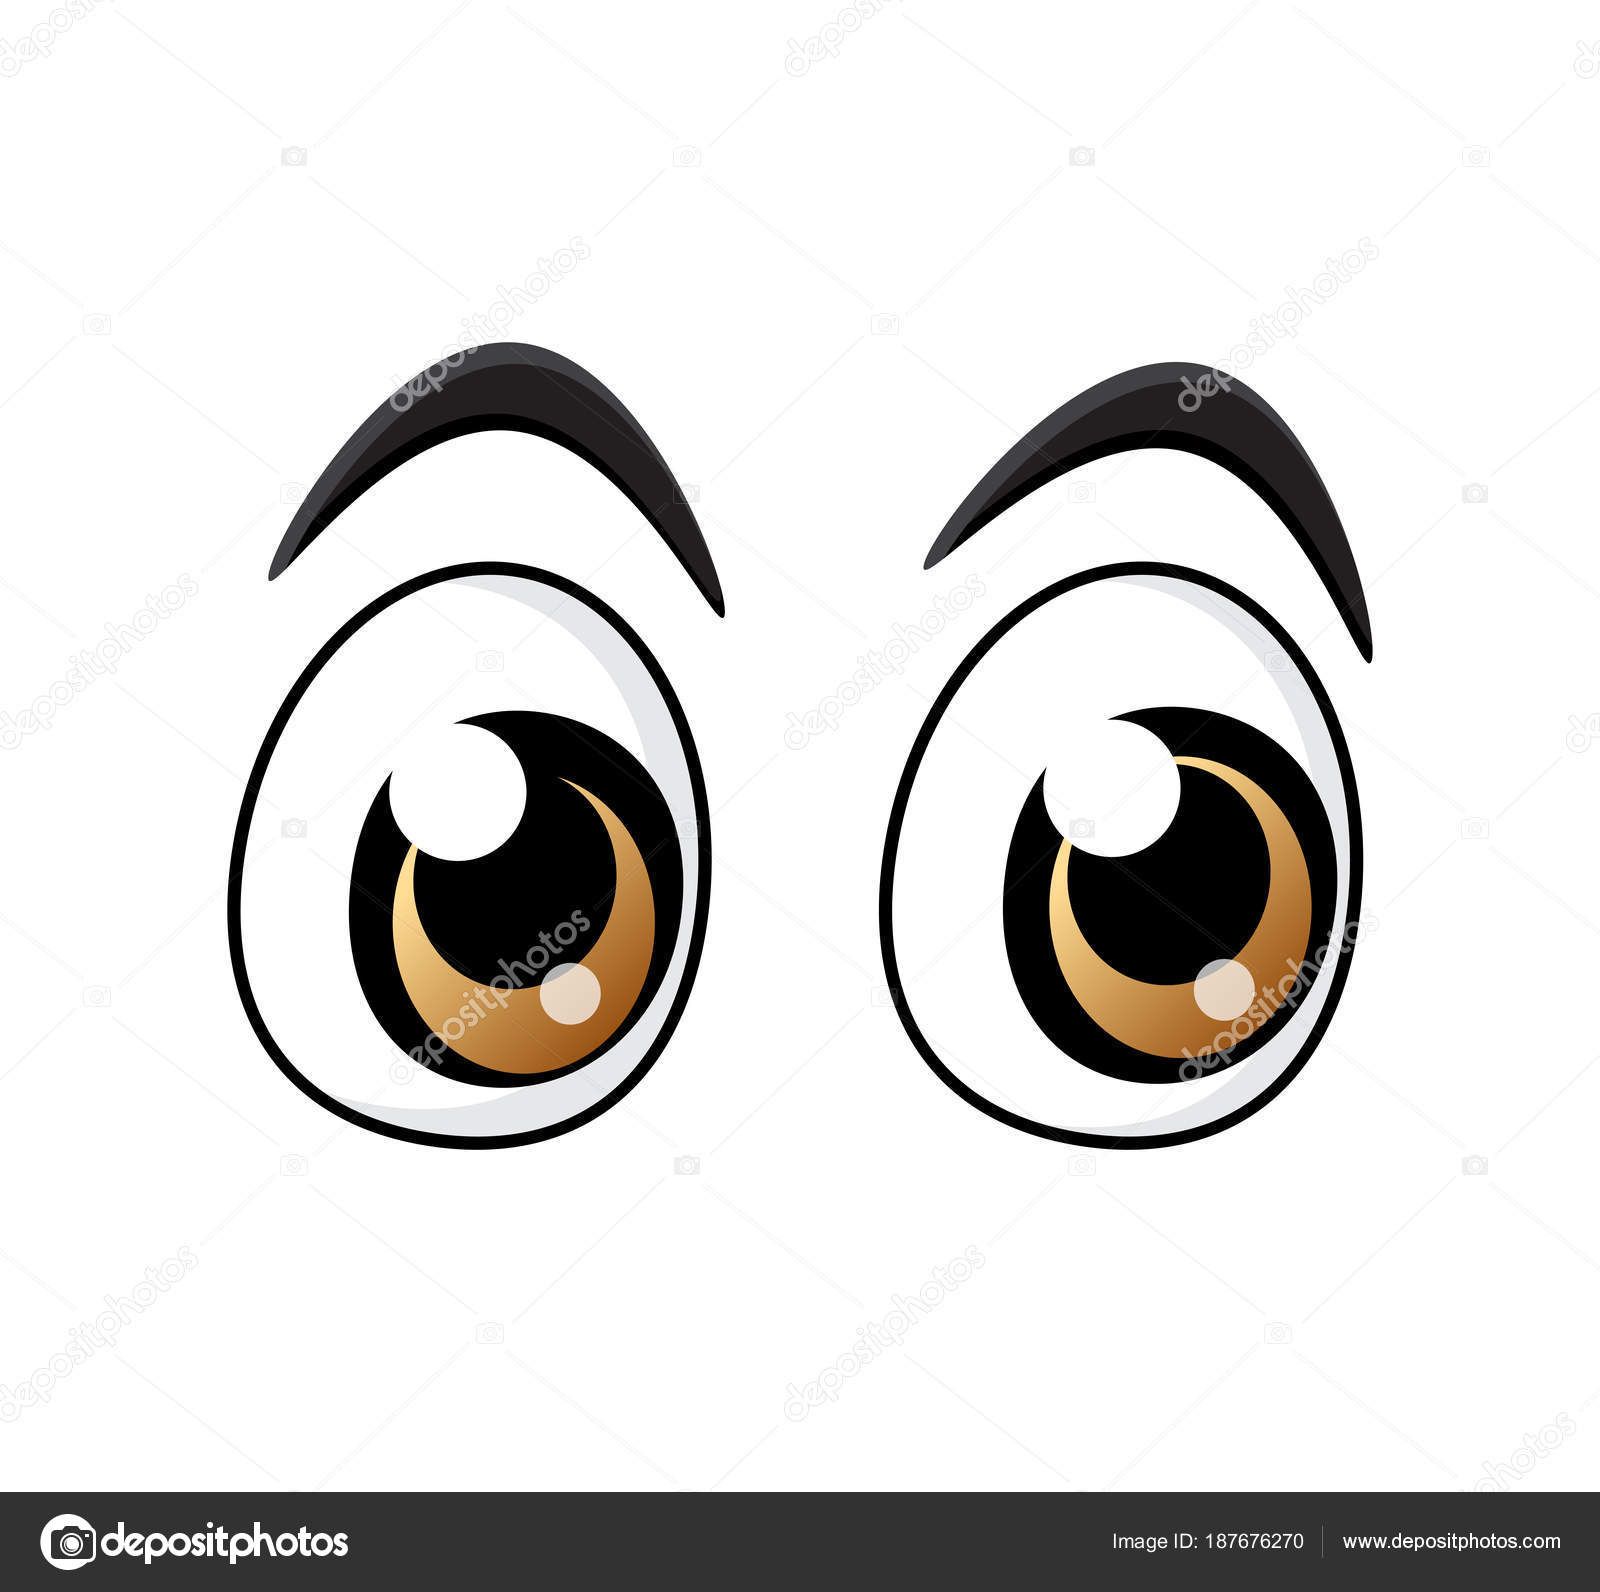 clipart eyes character